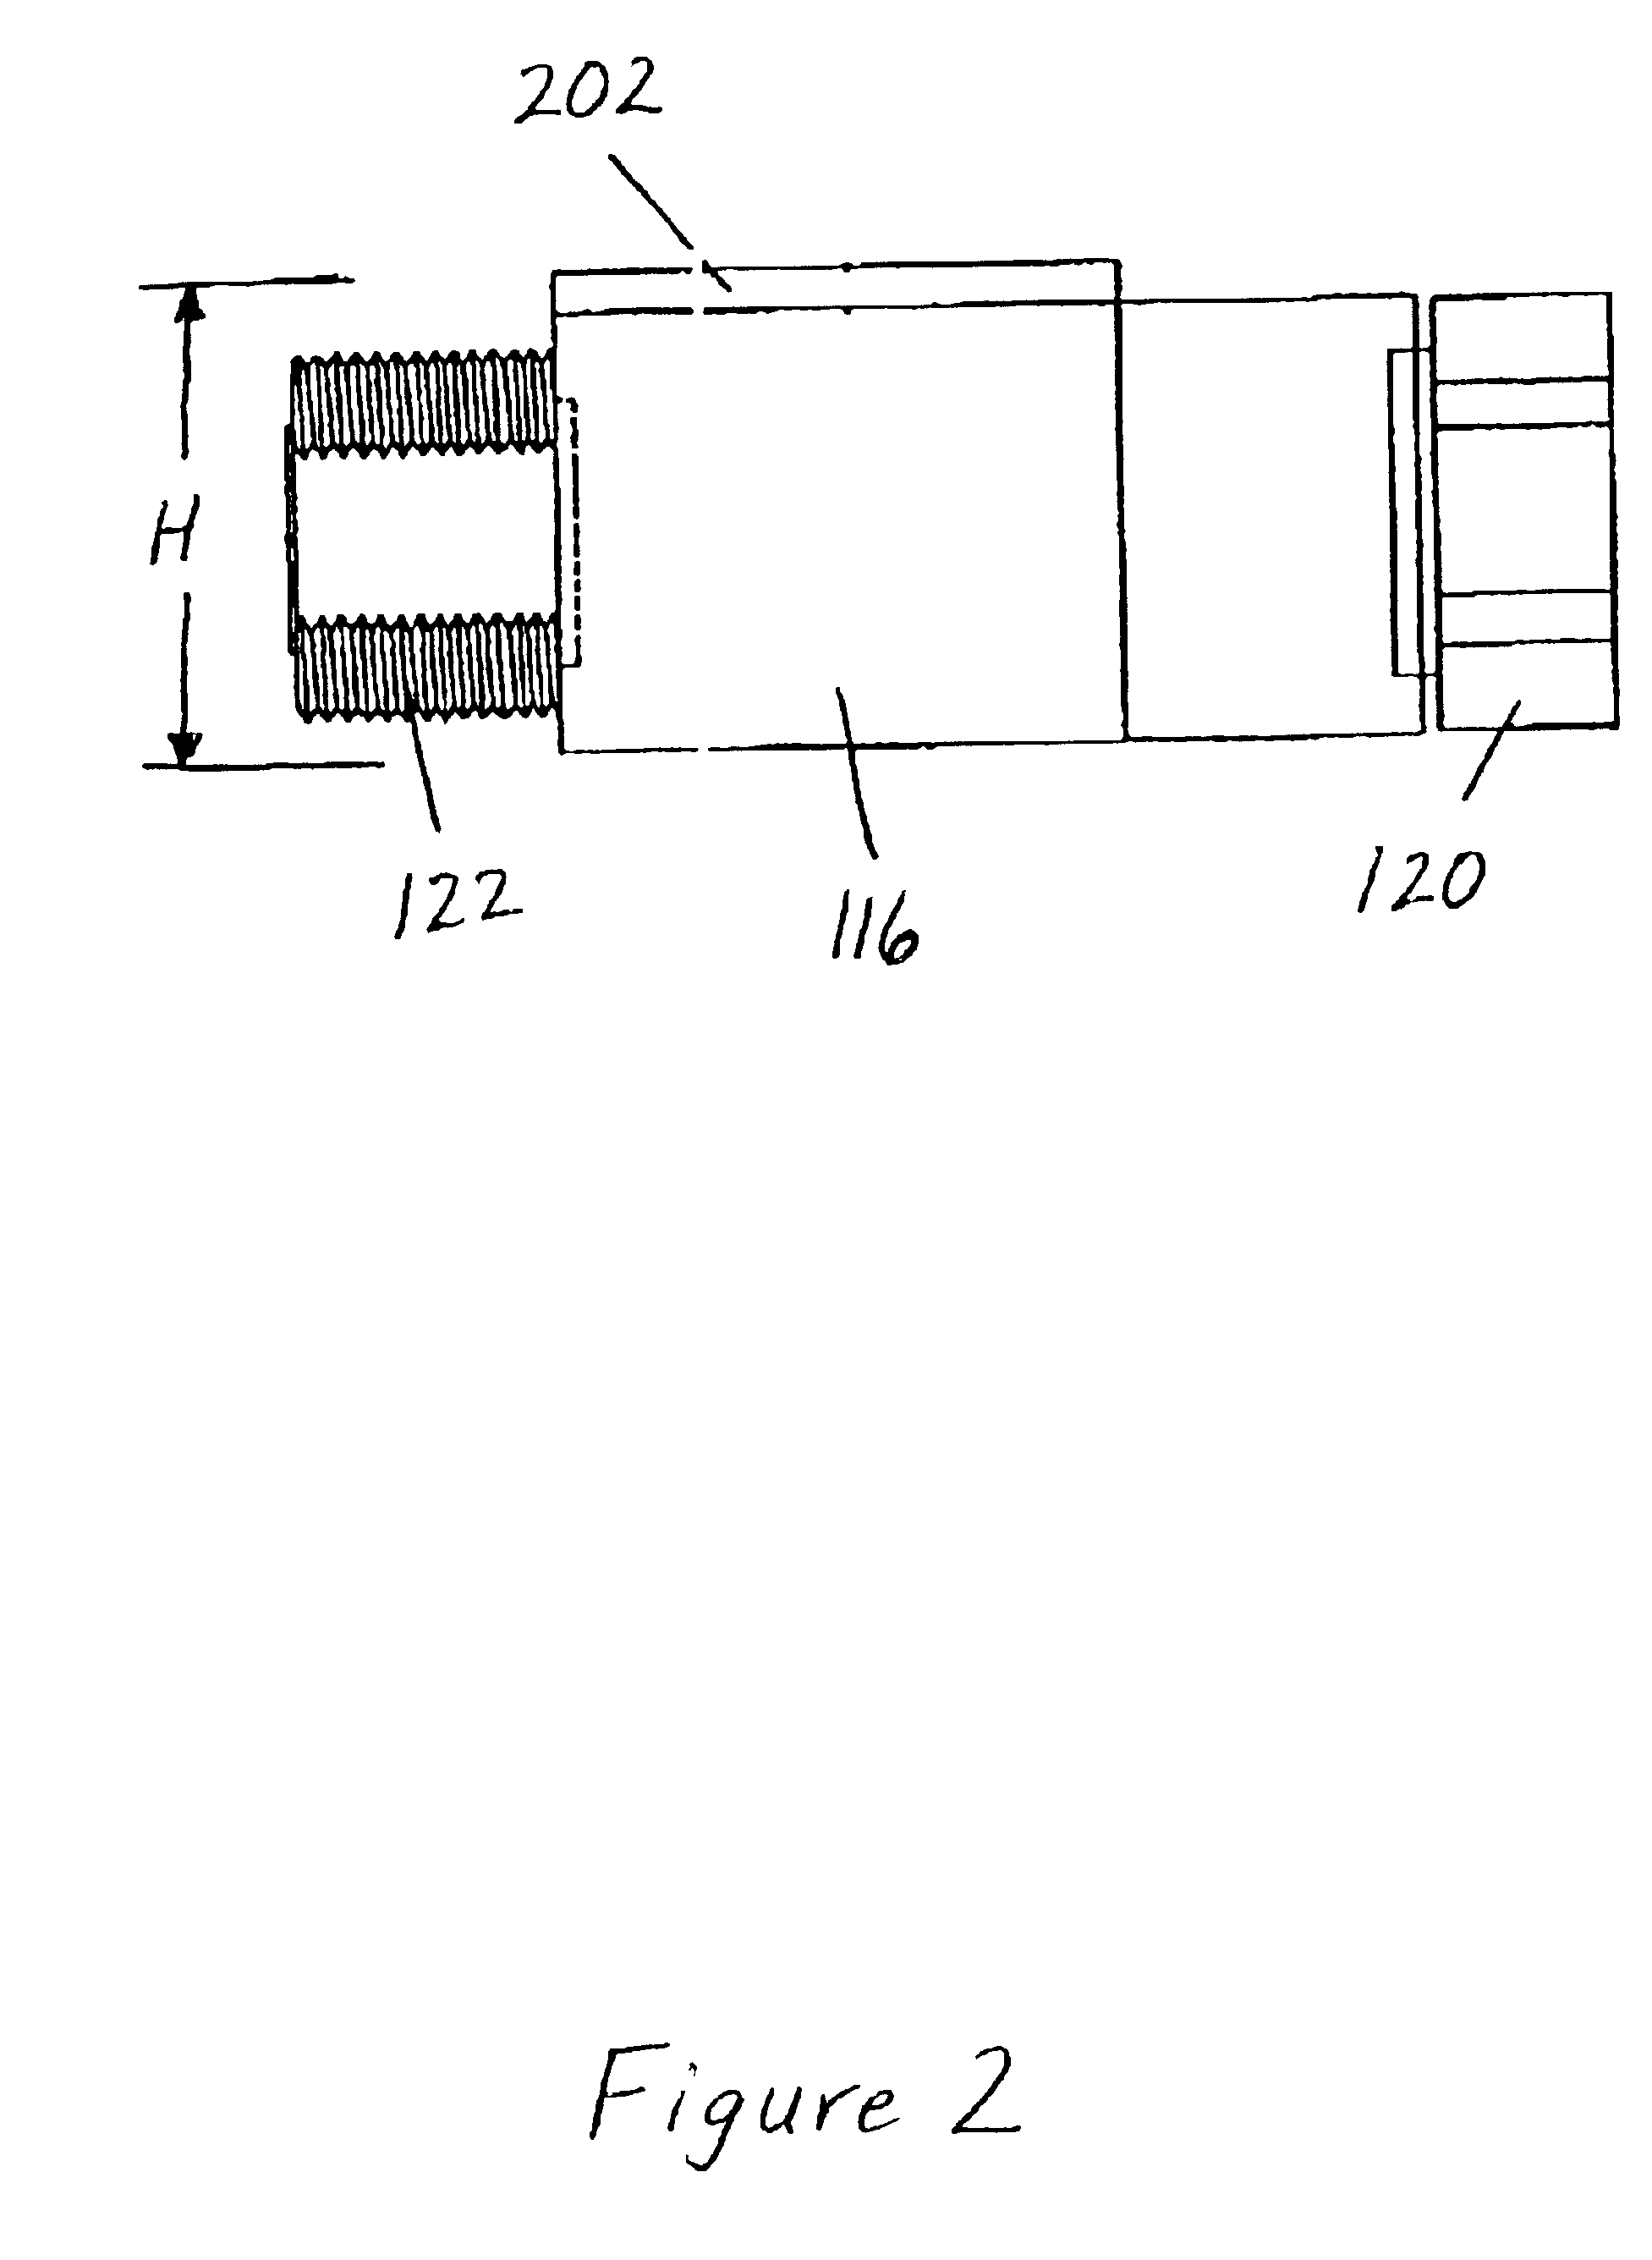 Rf surge protection device